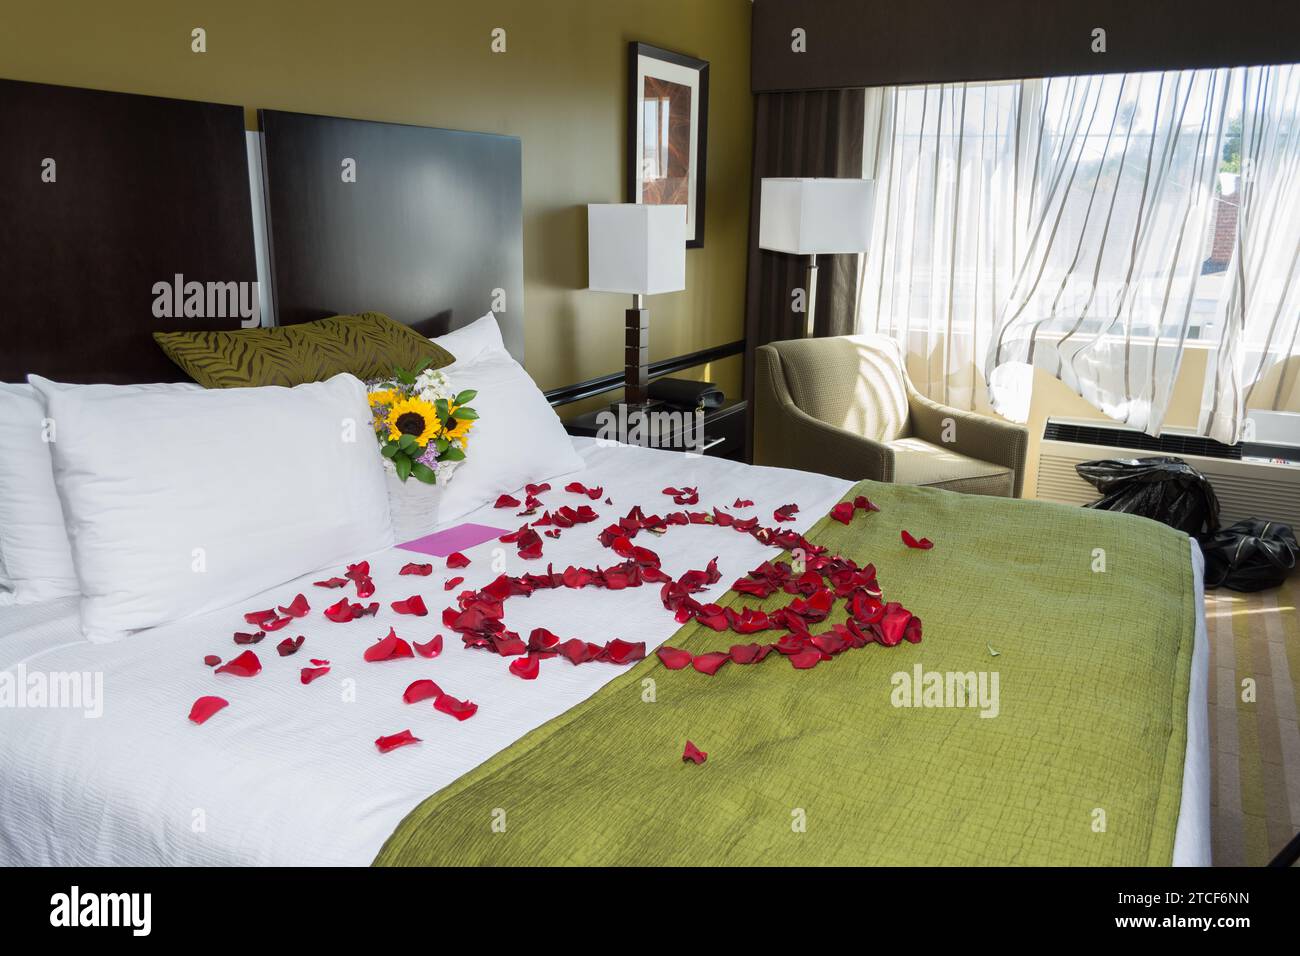 A white bed with rose petals arranged in a heart shape on the bedspread. Stock Photo